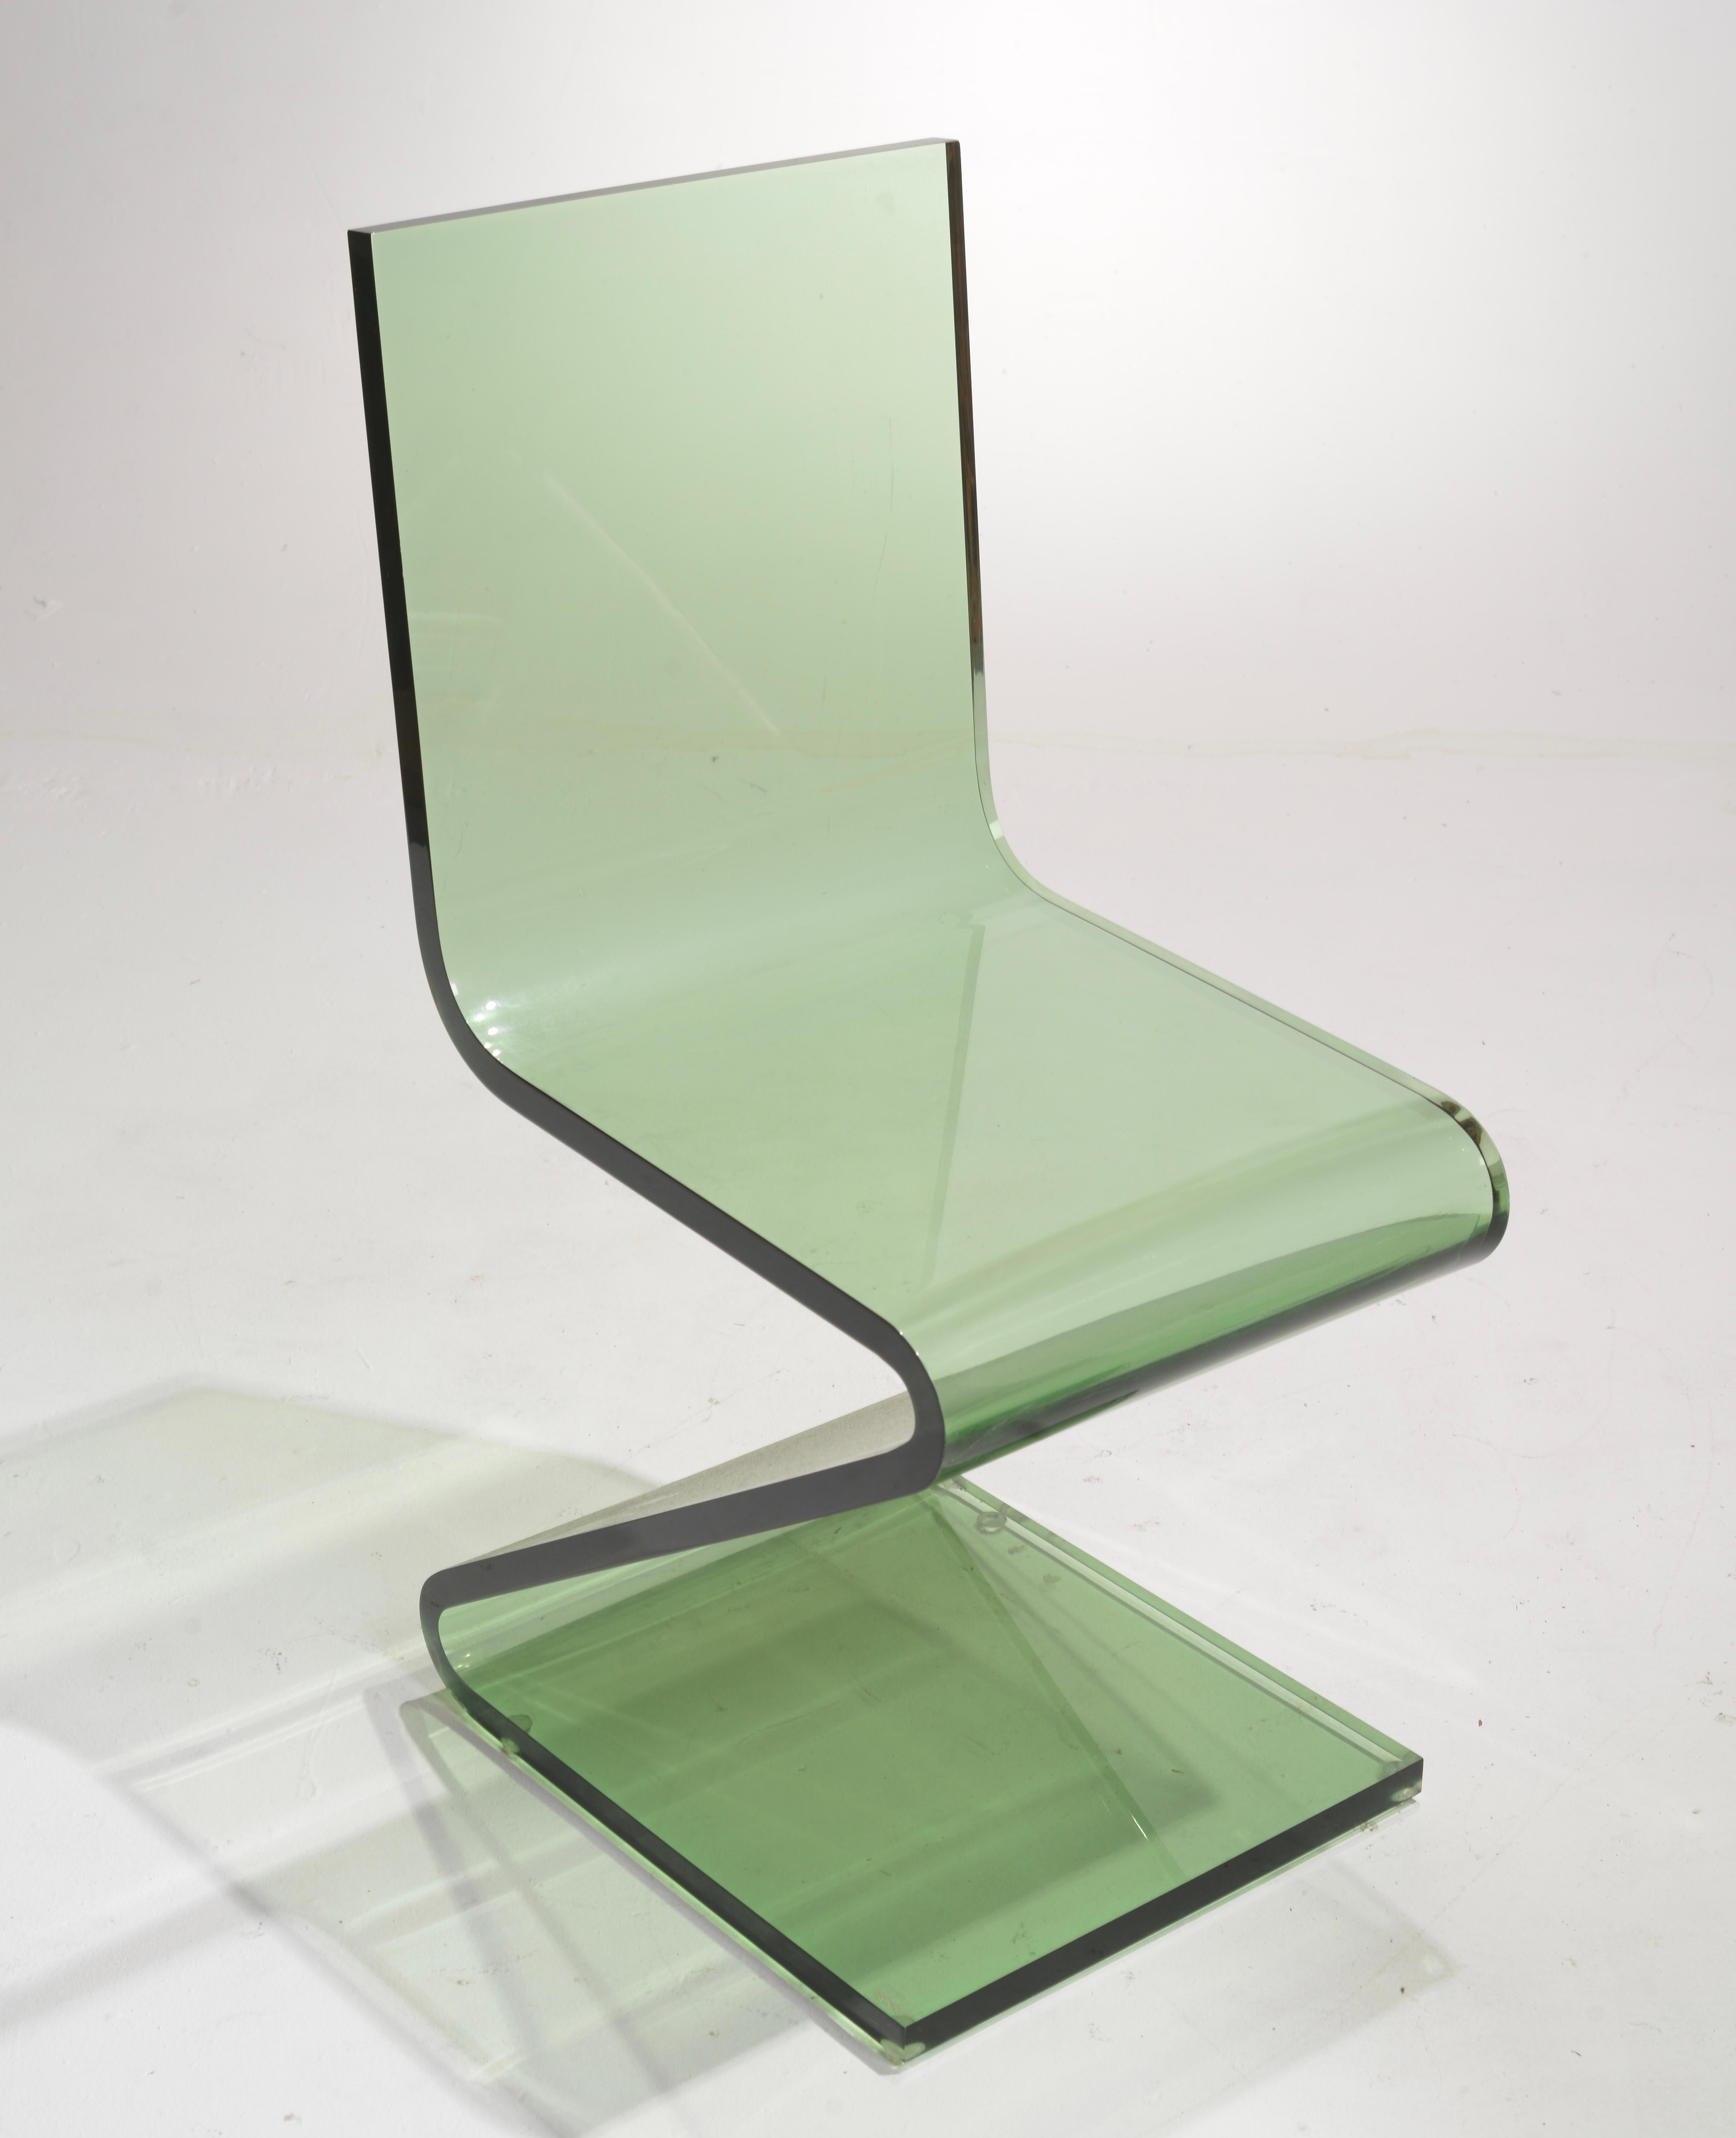 Vintage Lucite Z Table and Z Chairs by Shlomi Haziza for H Studio For Sale 8